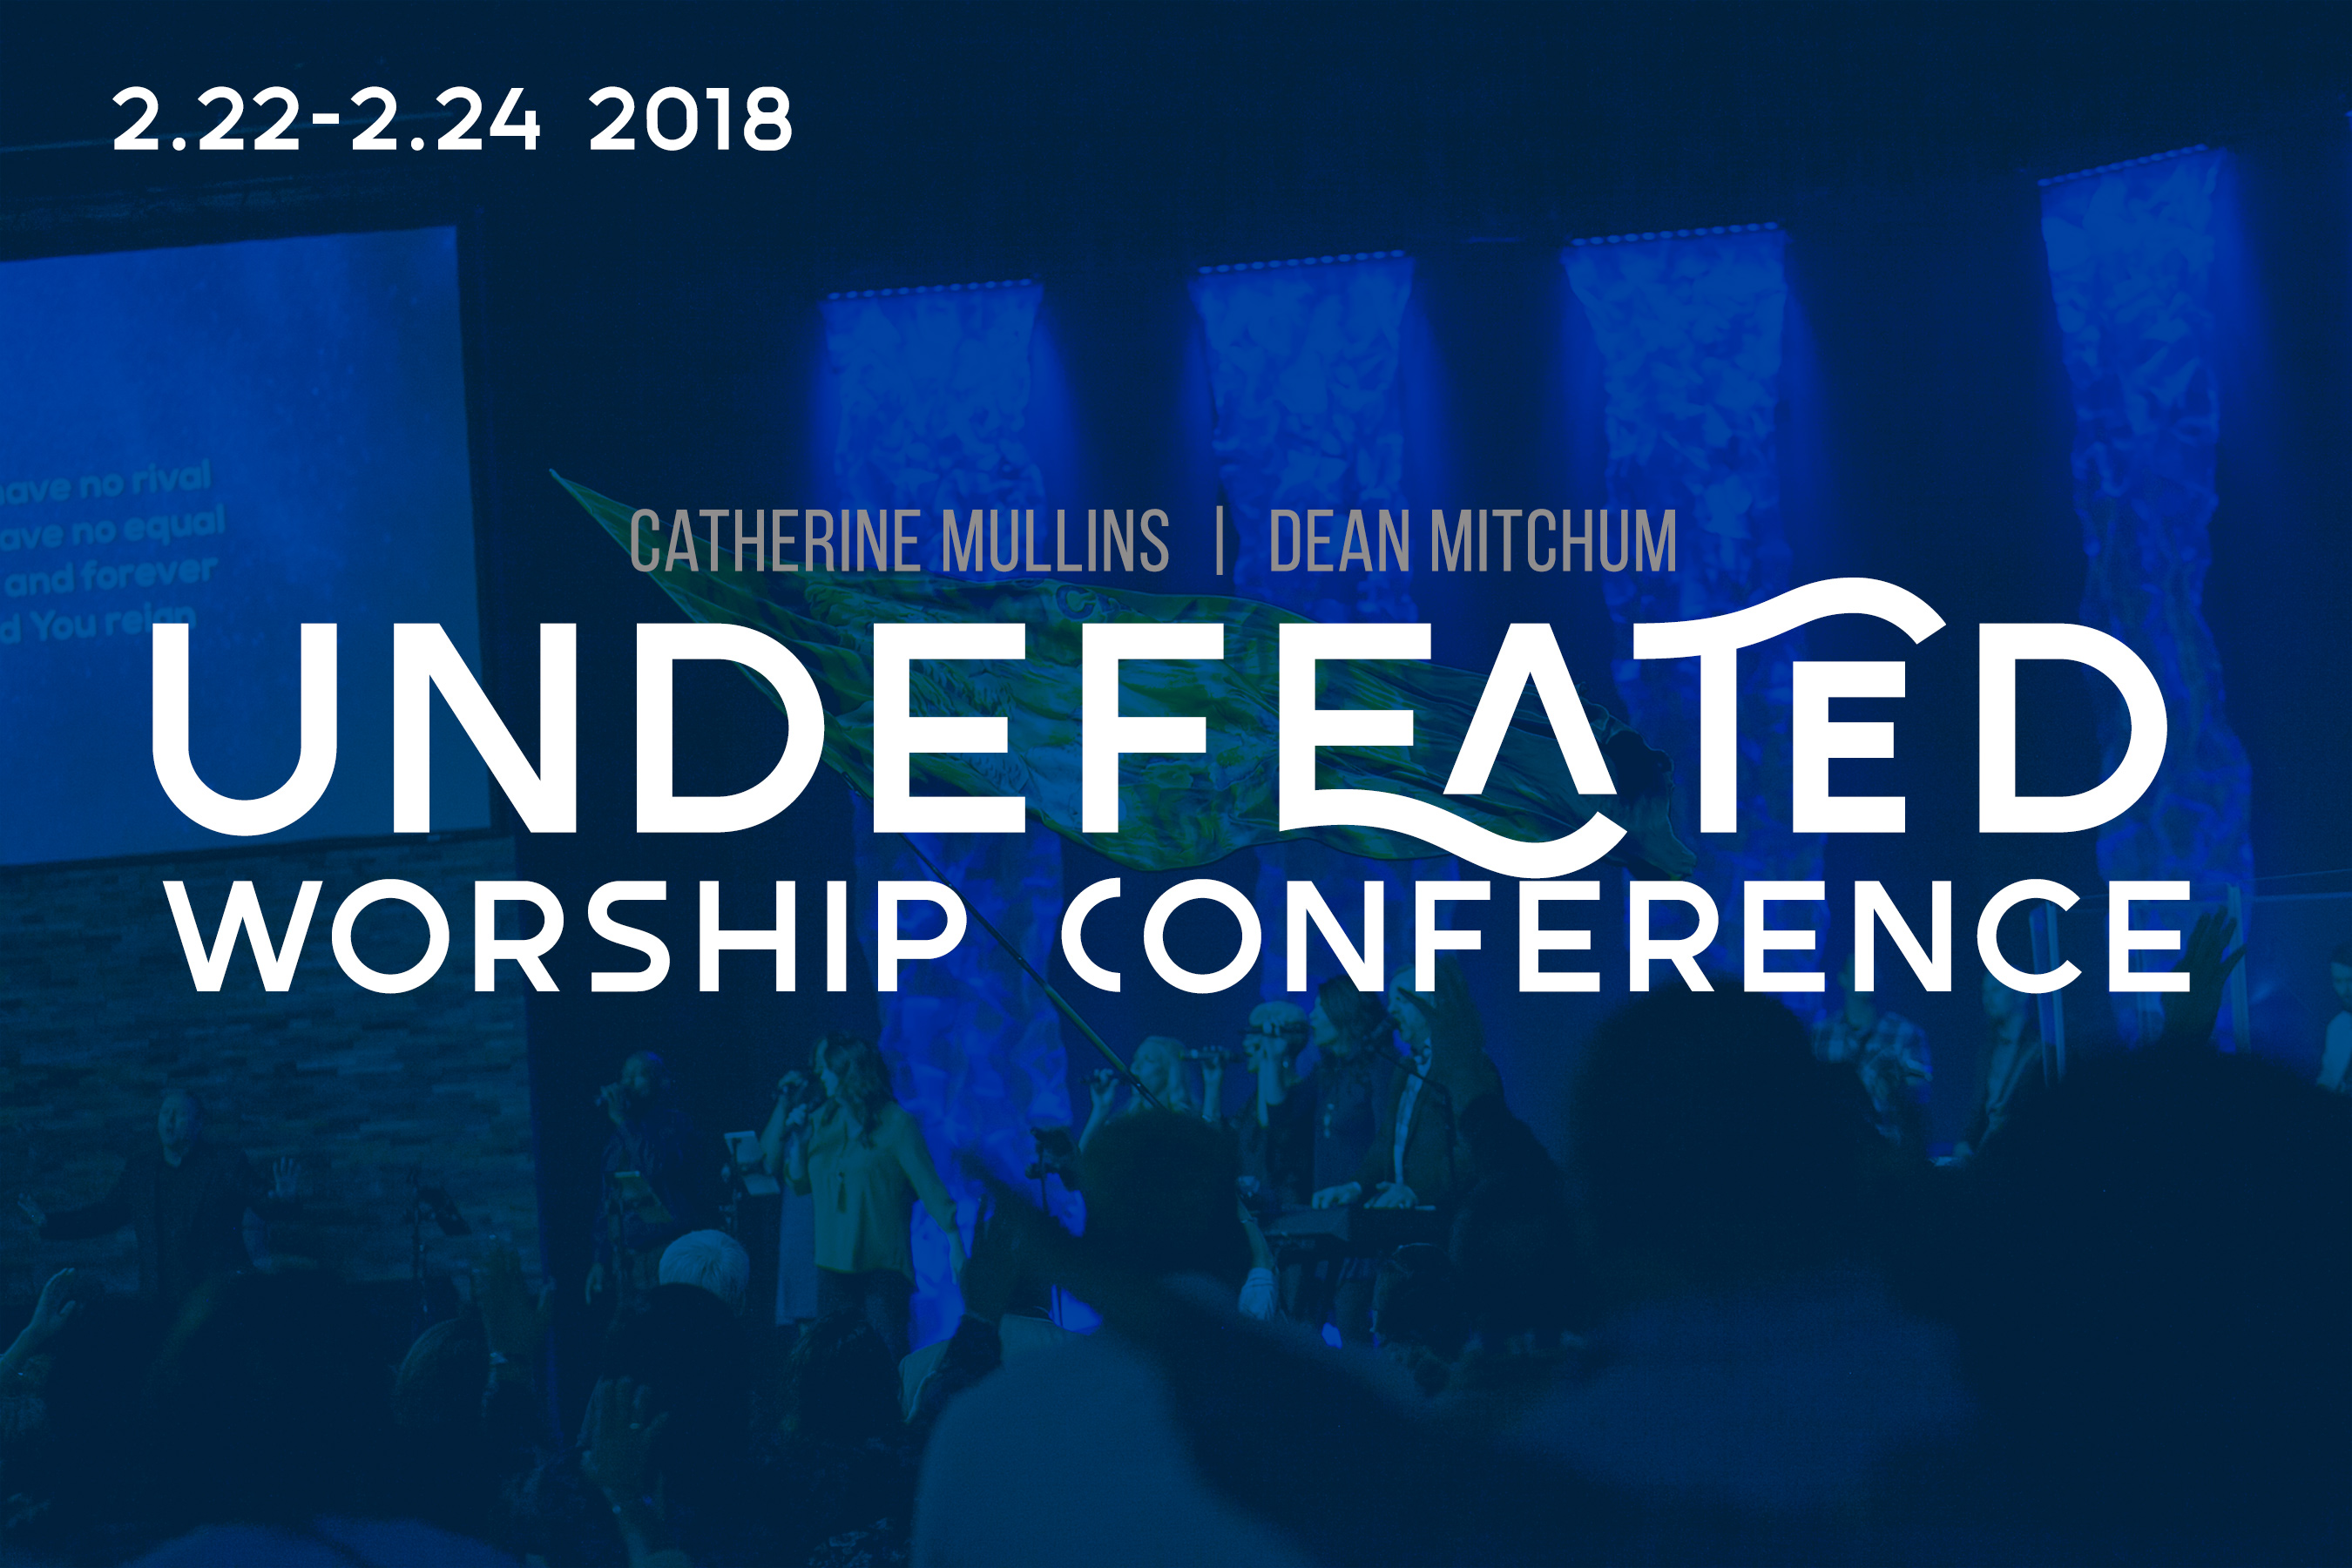 Undefeated Worship Conference Christian International